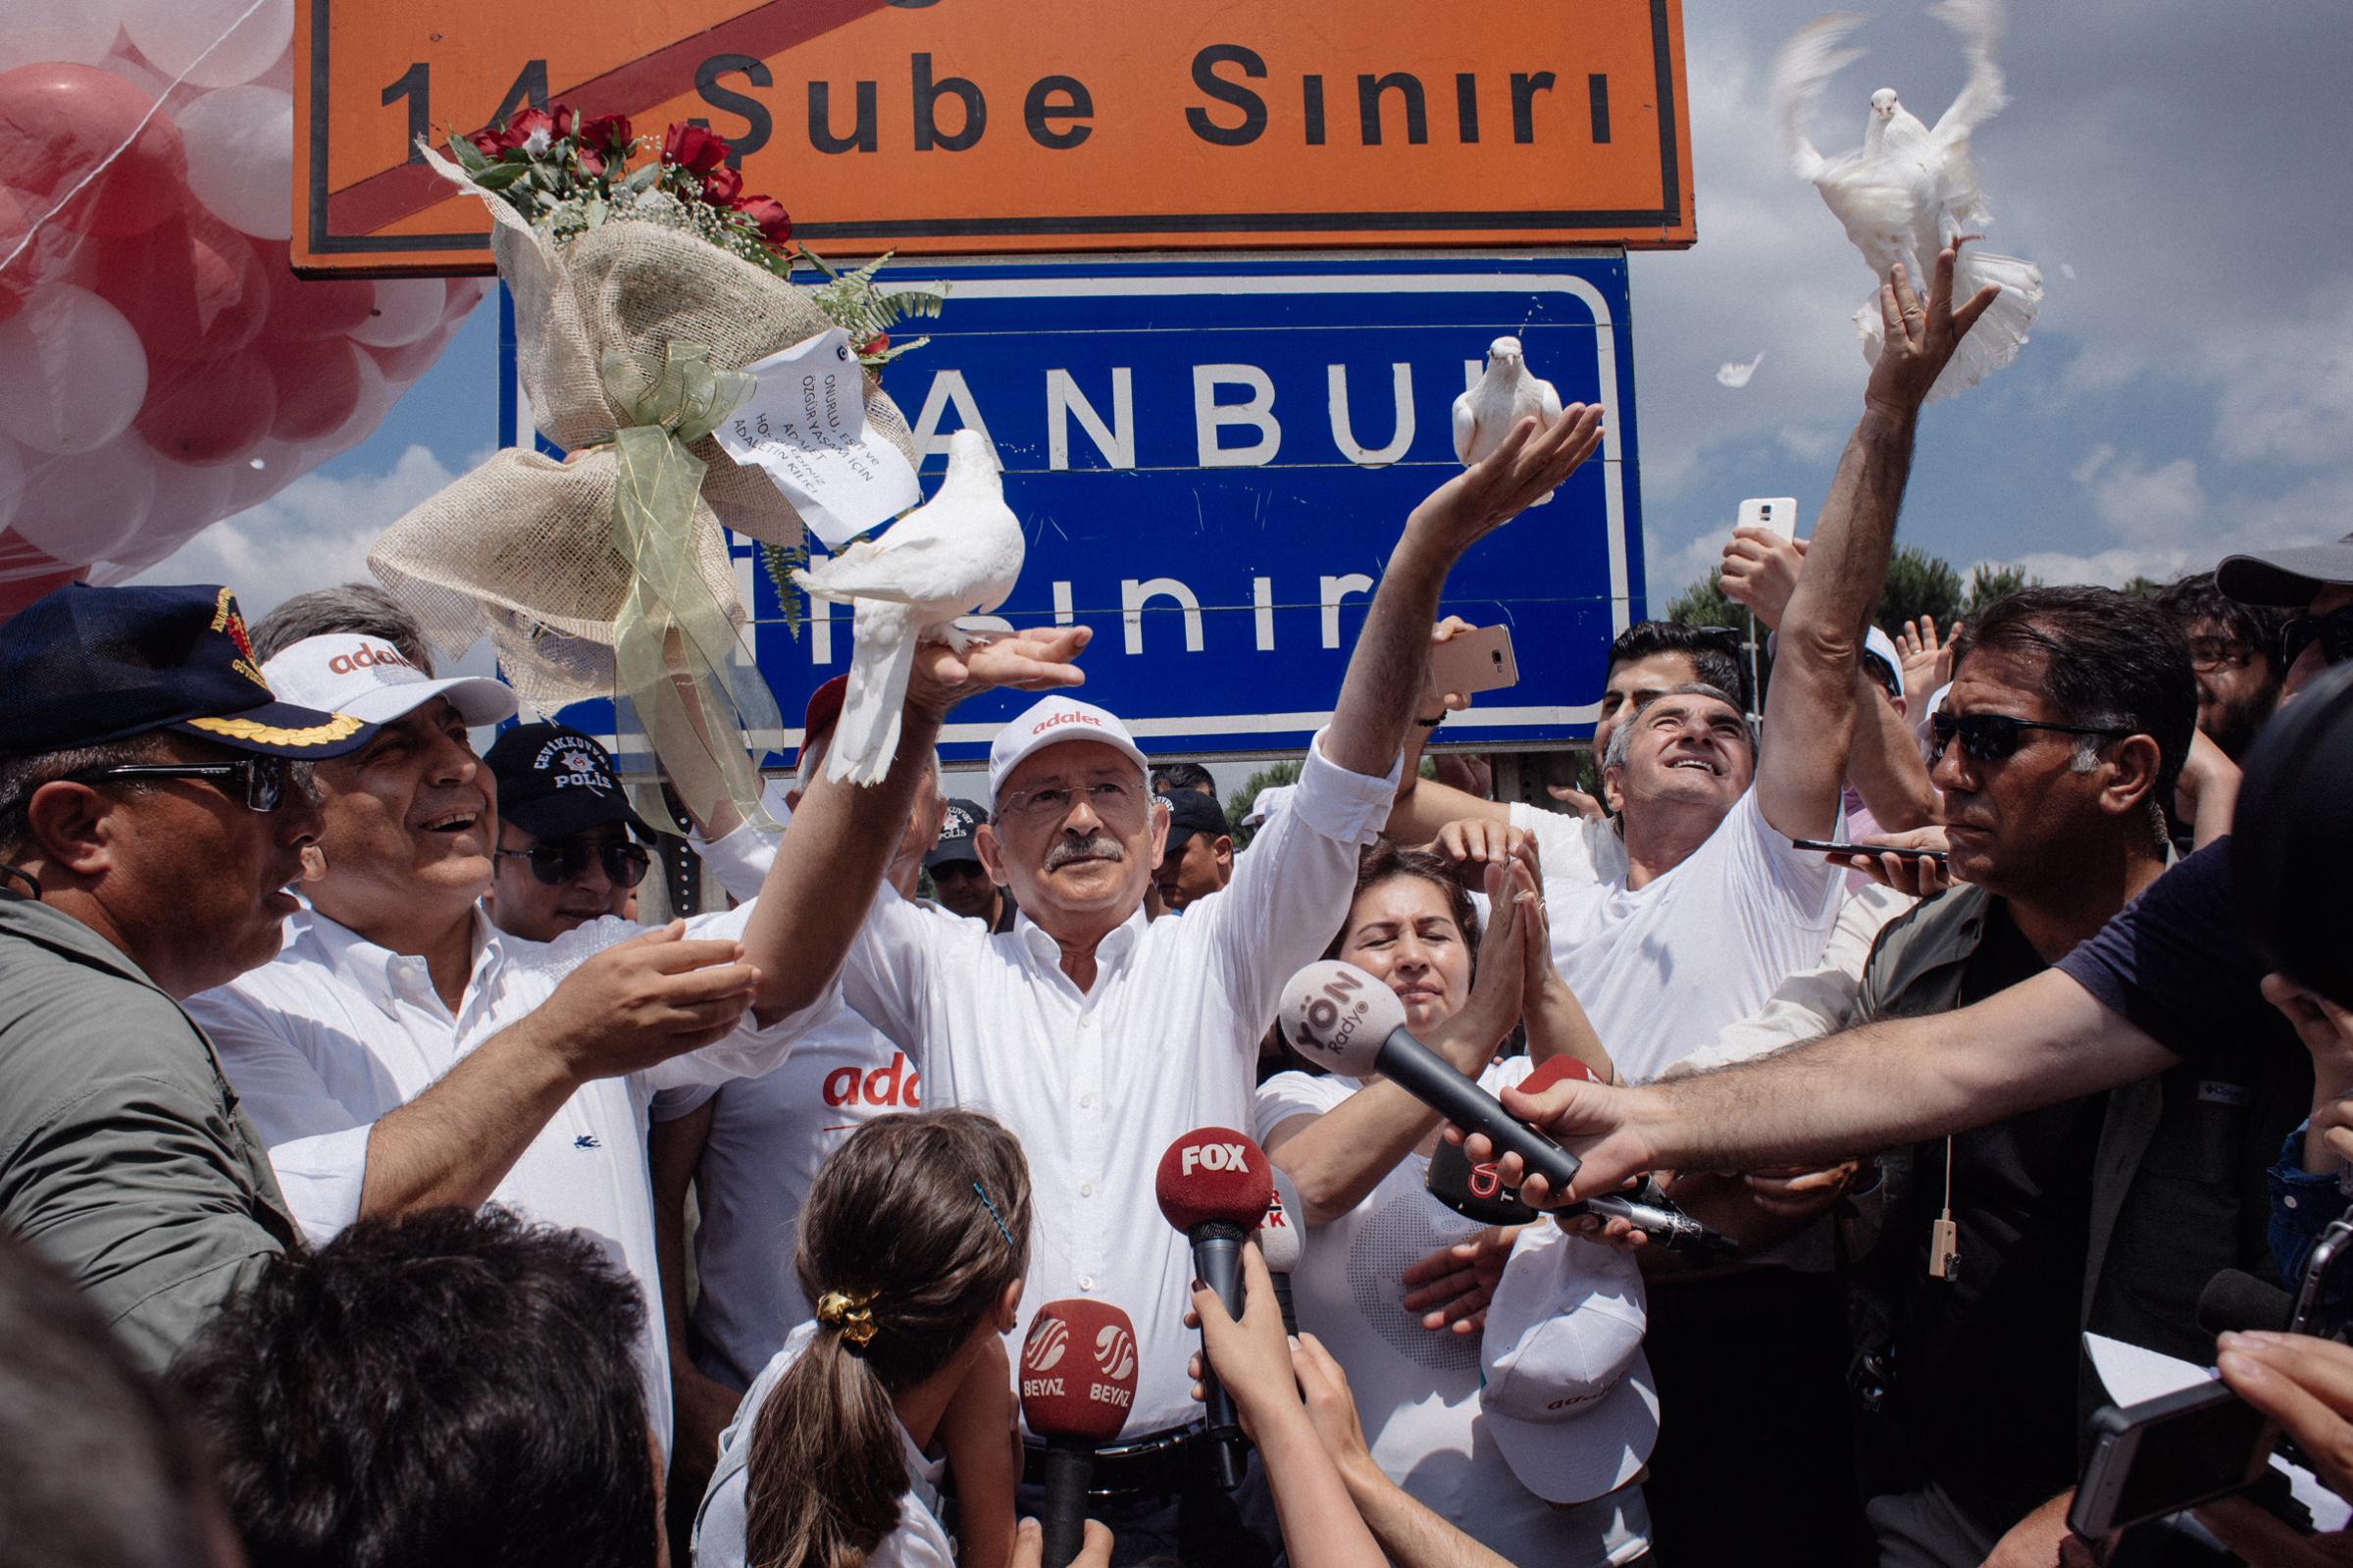 TURKEY. Istanbul. 2017. The head of Turkey's secularist Republican People's Party (CHP), Kemal Kilicdaroglu enters to Istanbul with thousands of supporters after the 23 days of Justice march. He stands near the Istanbul sign and frees doves at the entrance of Istanbul